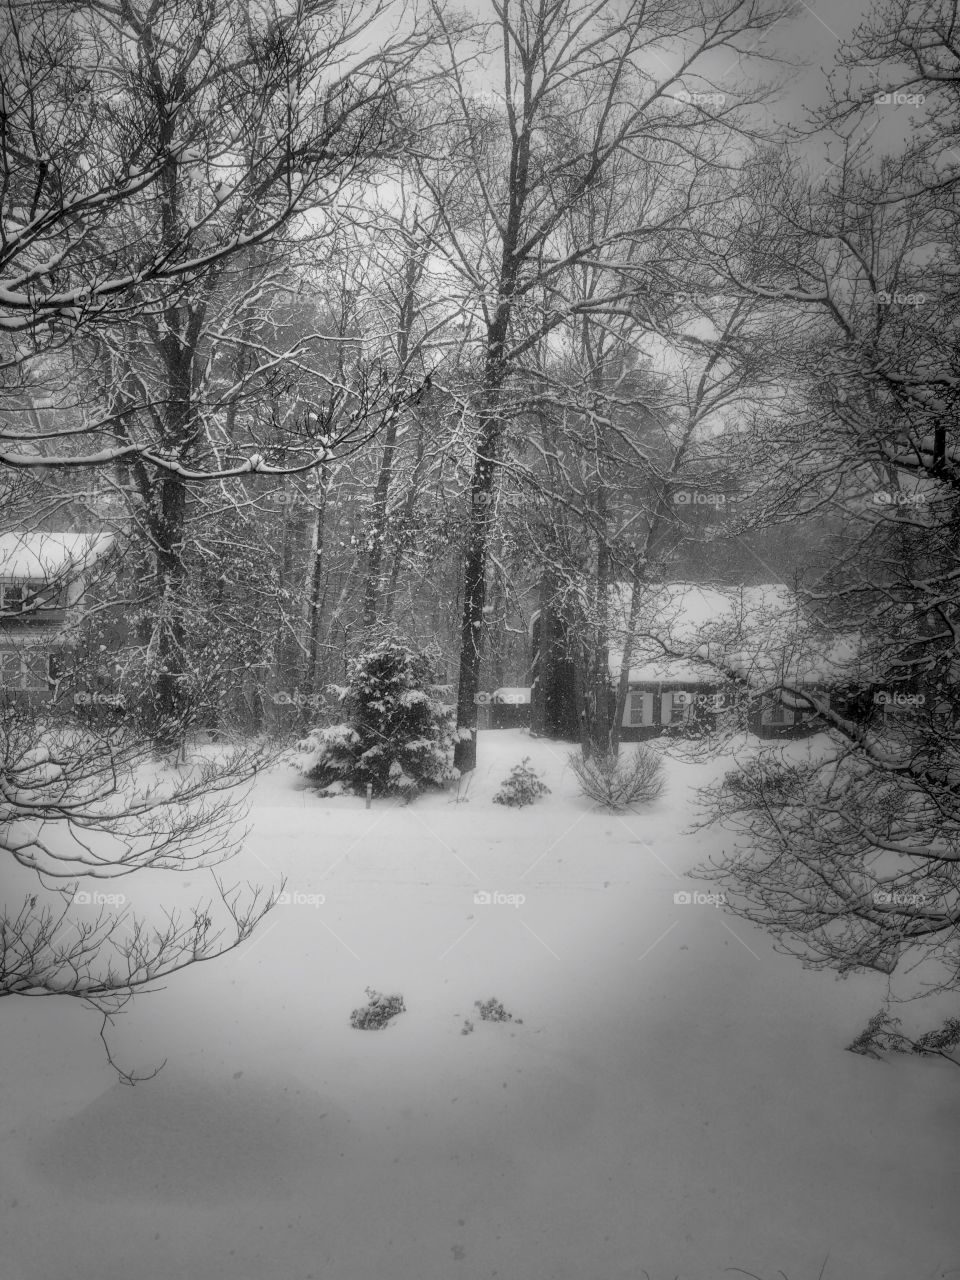 "Sound of Silence" - First snowstorm of 2017-18" in New England (Rural Massachusetts) - A black & white image depicts snowcovered trees and snow topped roofs atop a pristine white blanket of snow on the ground. Nature rests in stillness & silence.